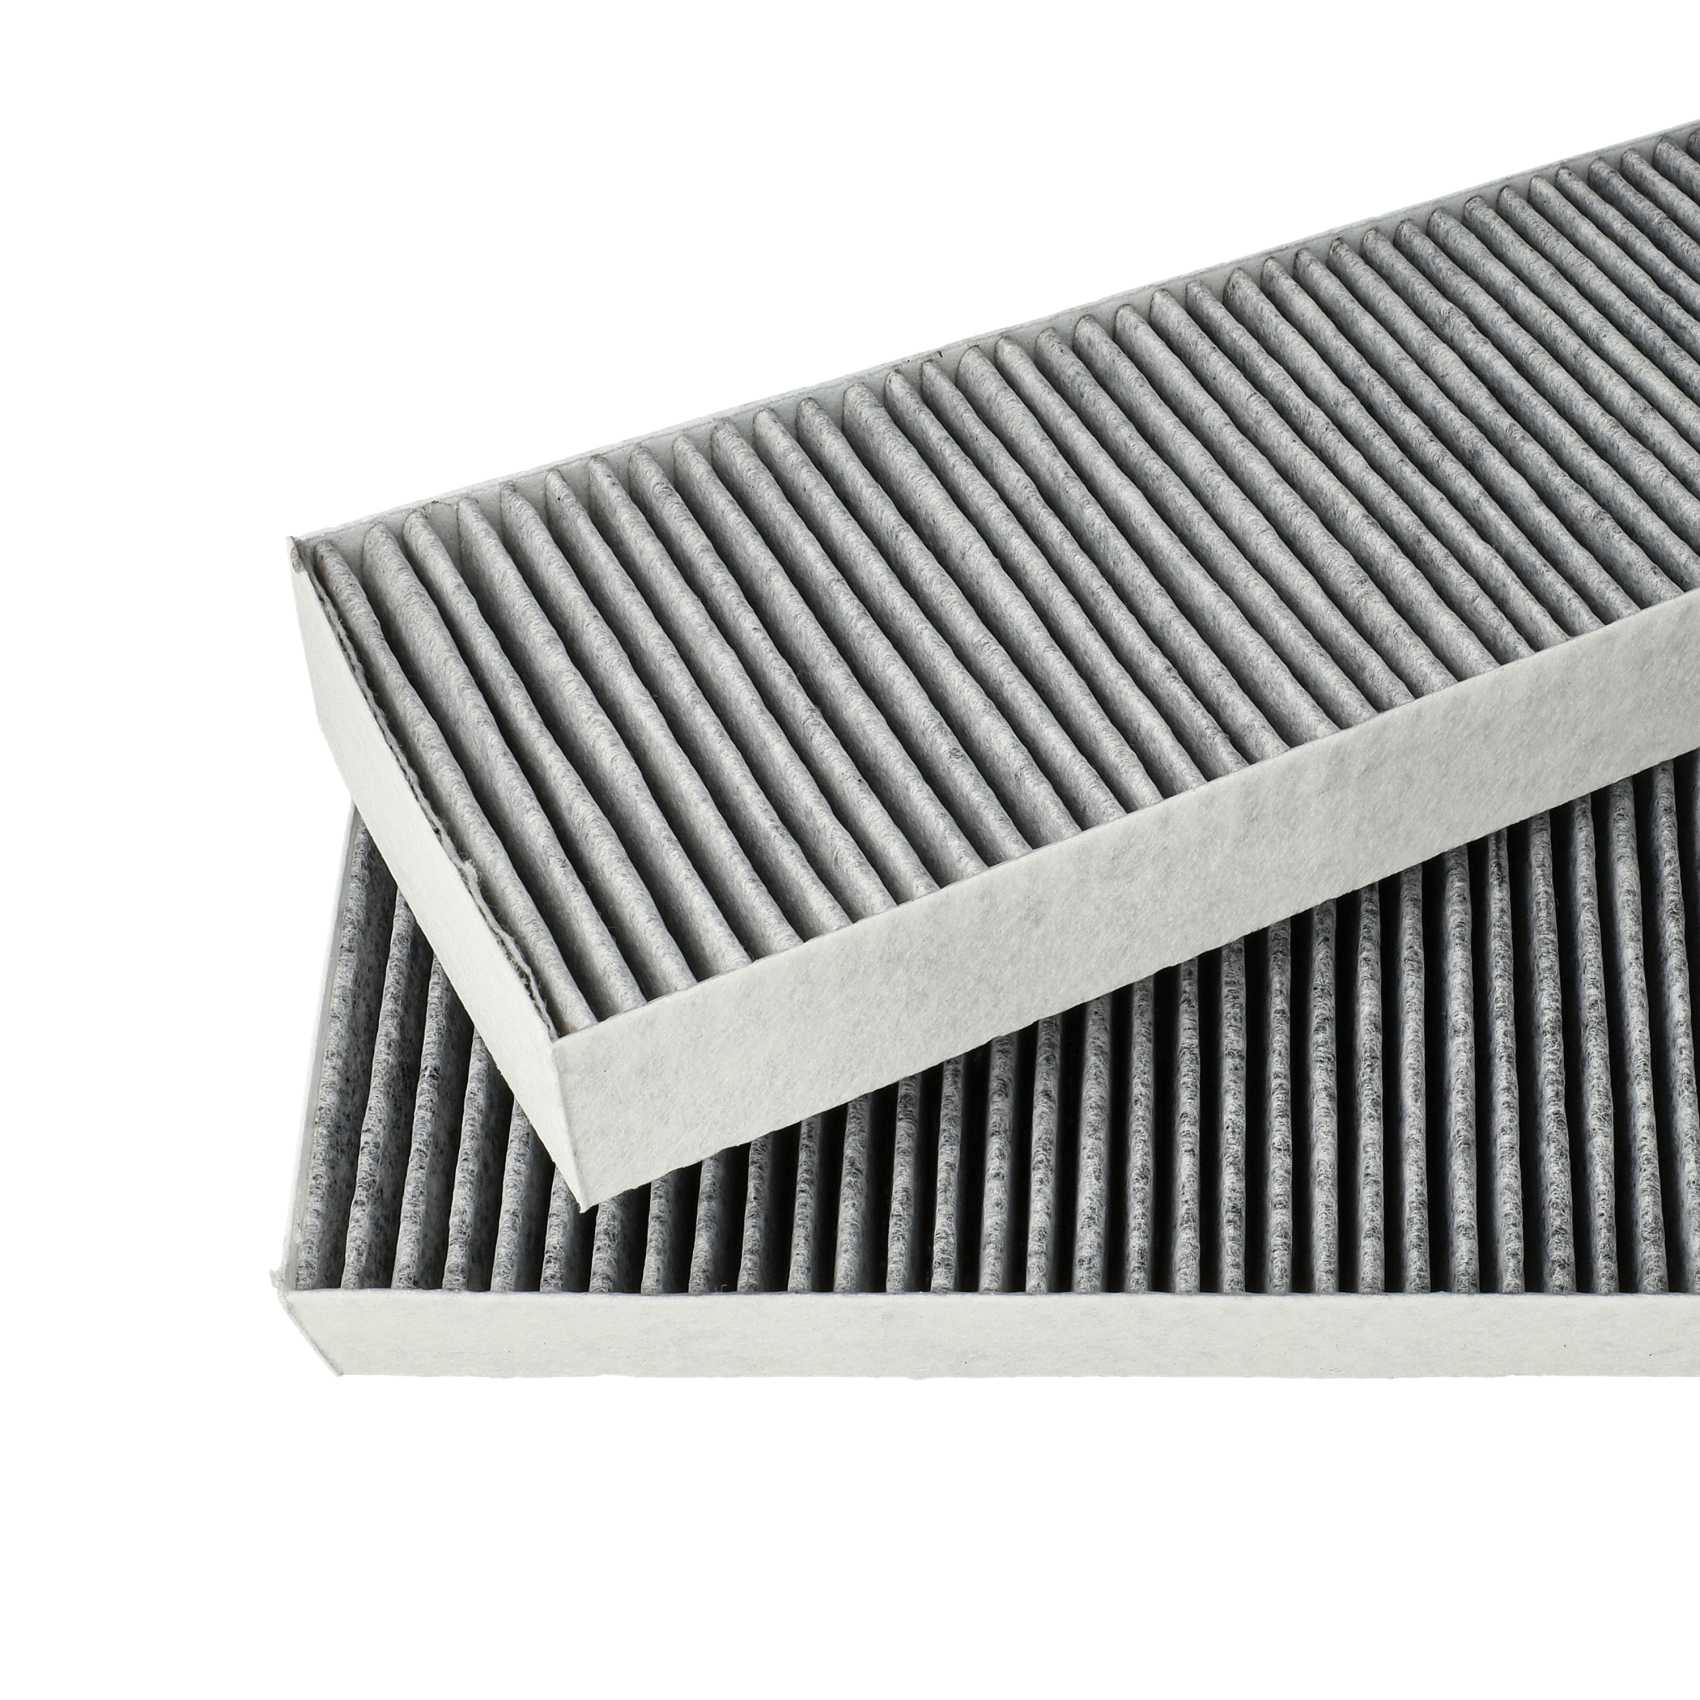 2x Activated Carbon Filter as Replacement for Bora BAKFS, BAKFS-002 for Bora Hob - 34 x 12.2 x 4.25 cm